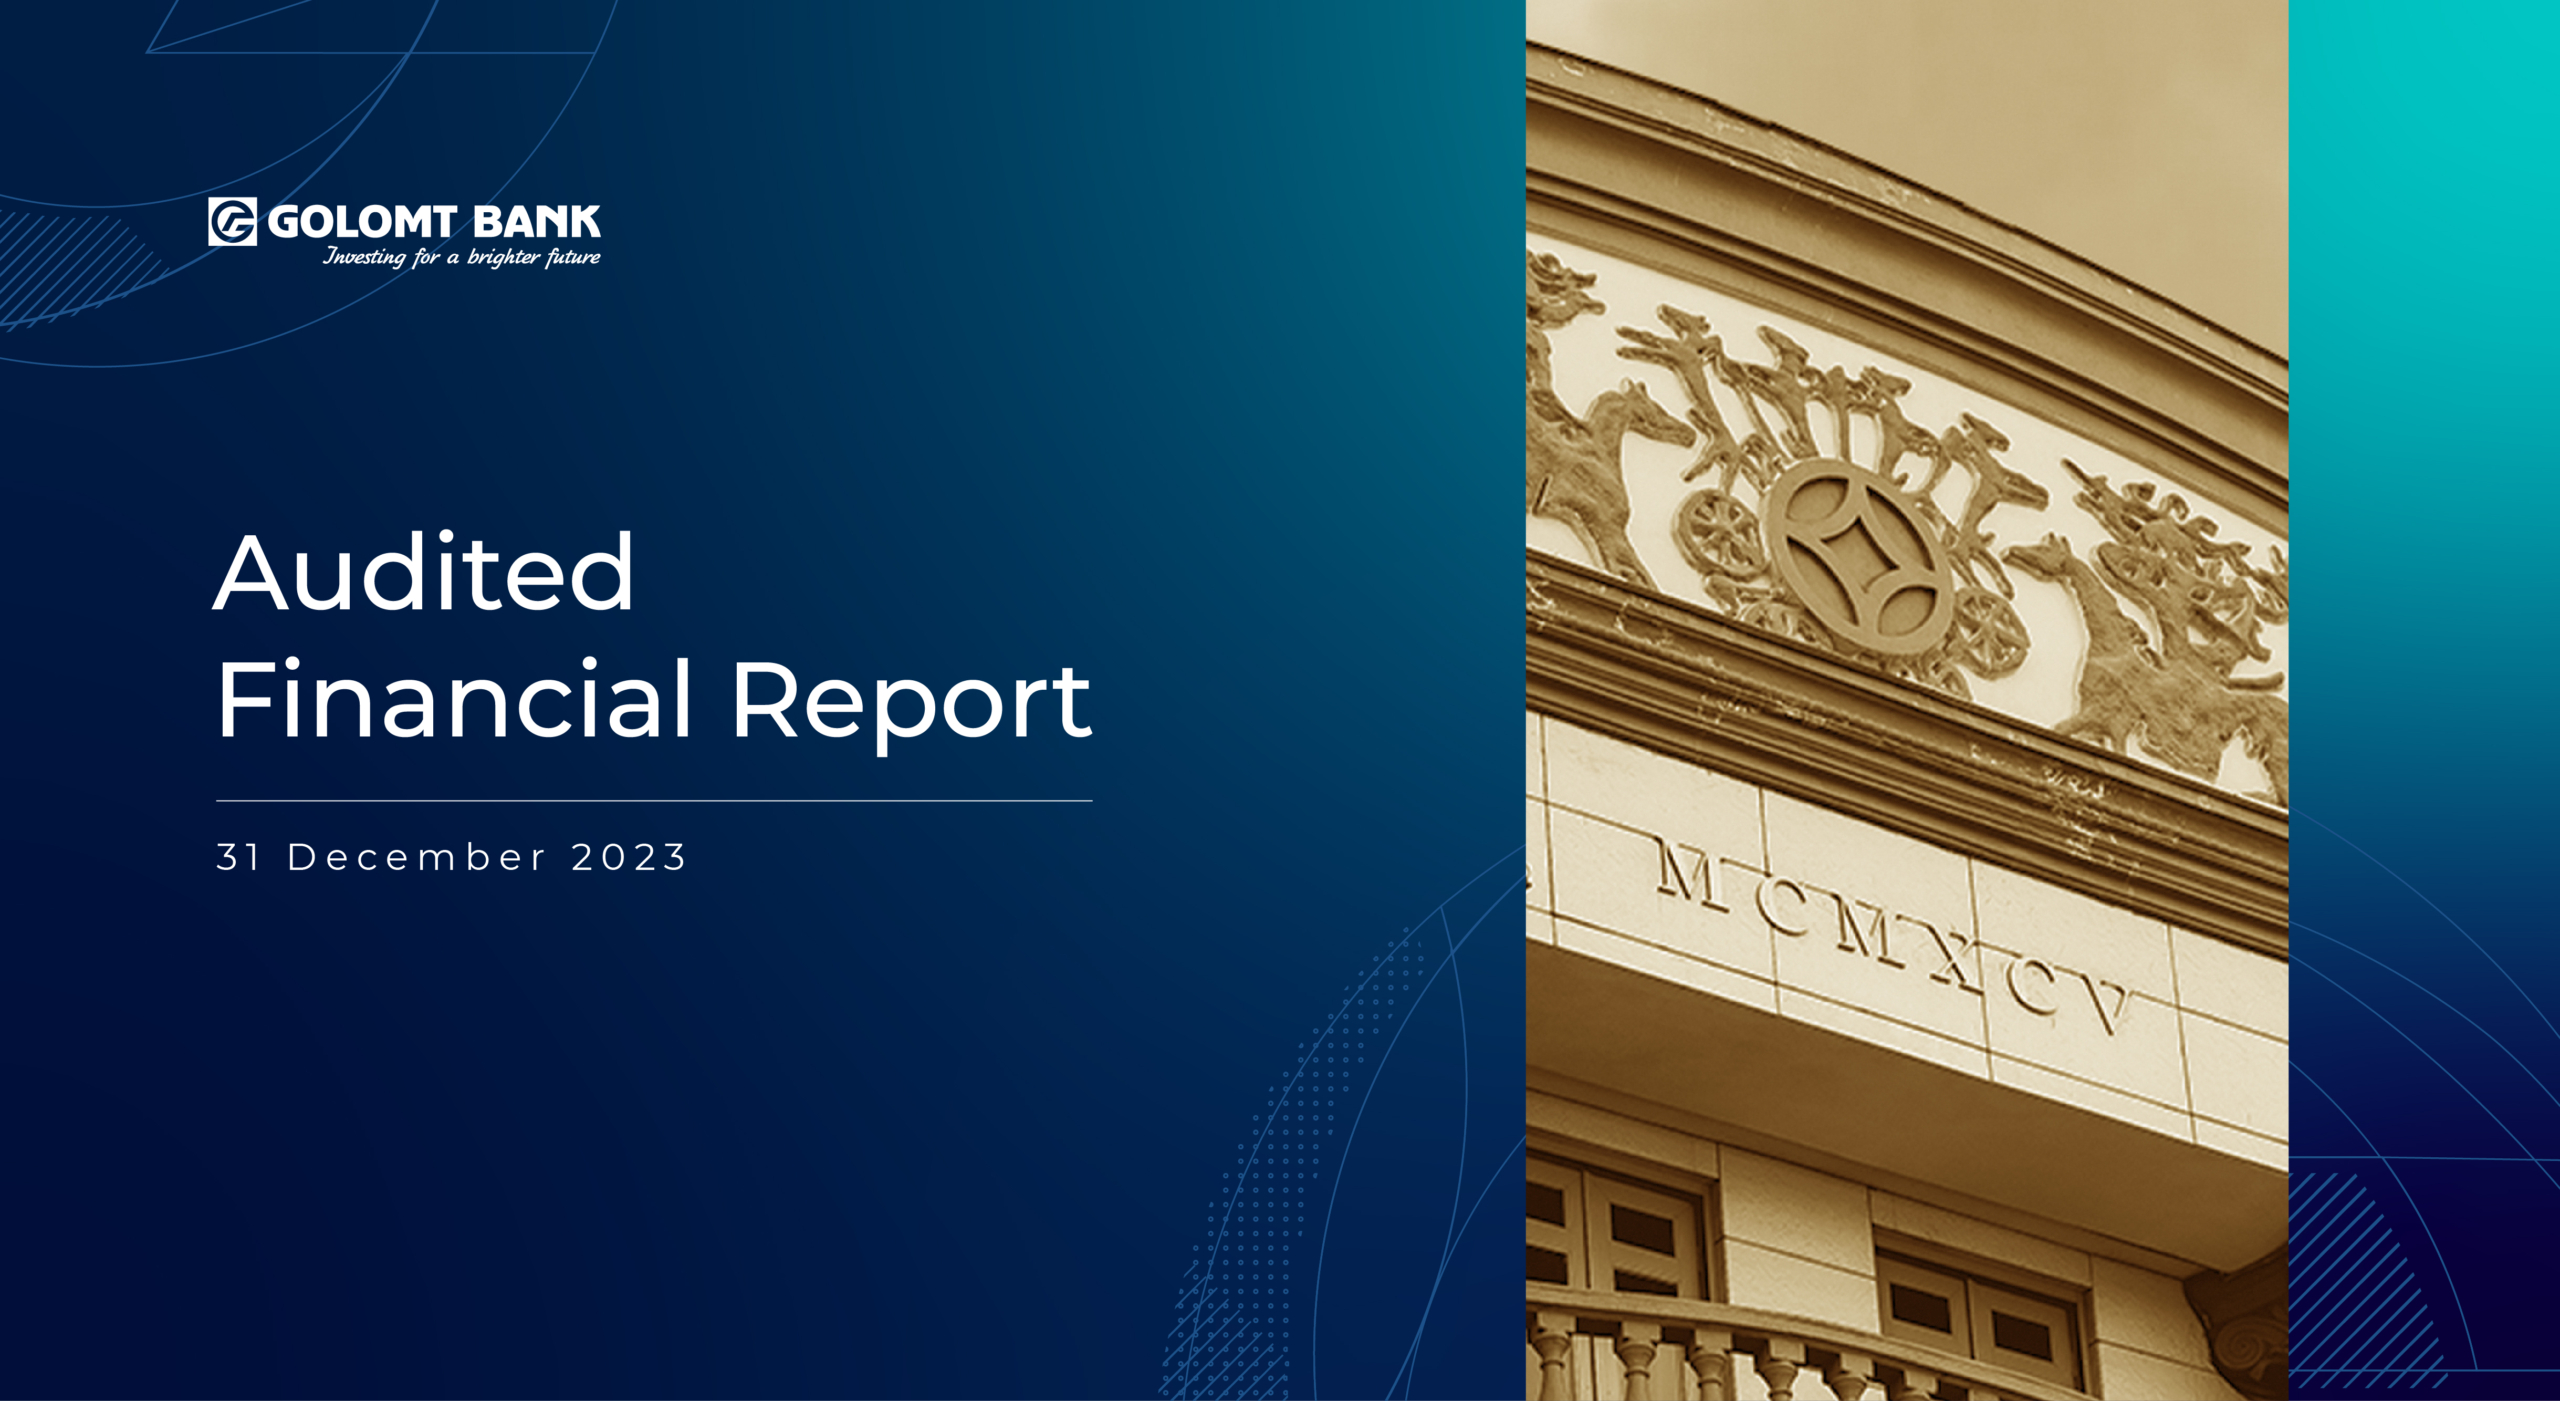 Golomt Bank released the audited 2023 financial report